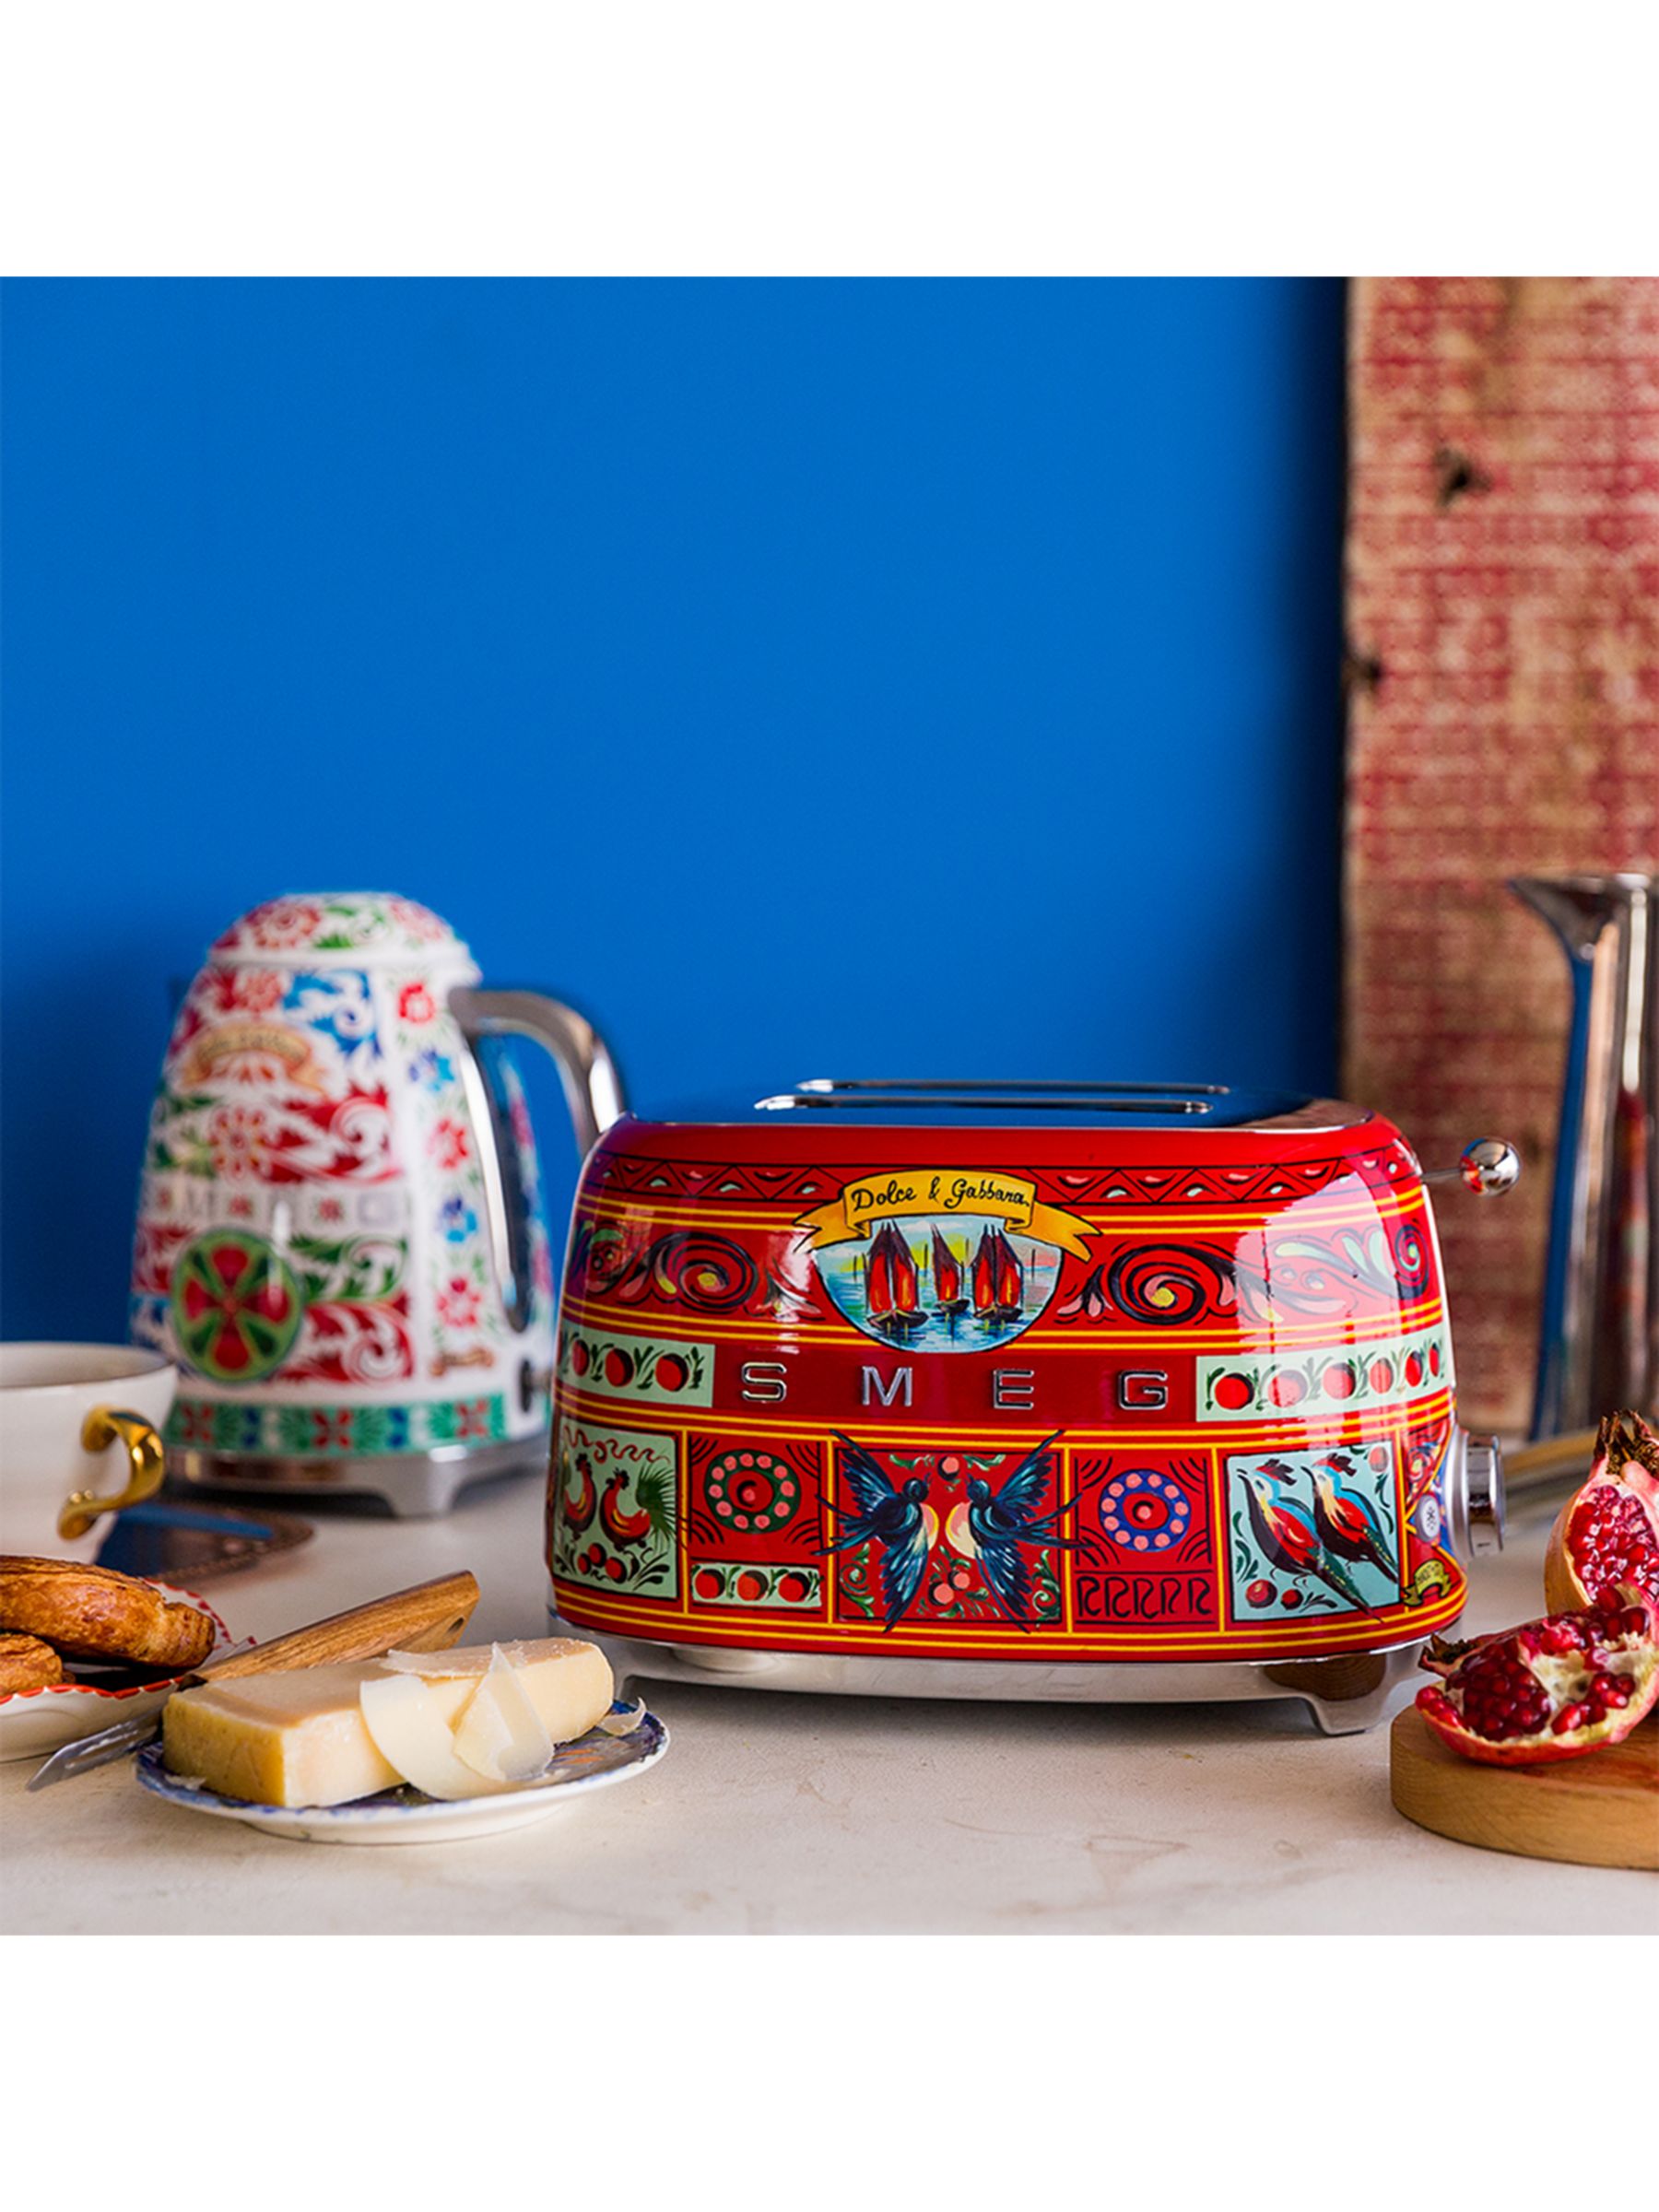 dolce and gabbana kettle and toaster